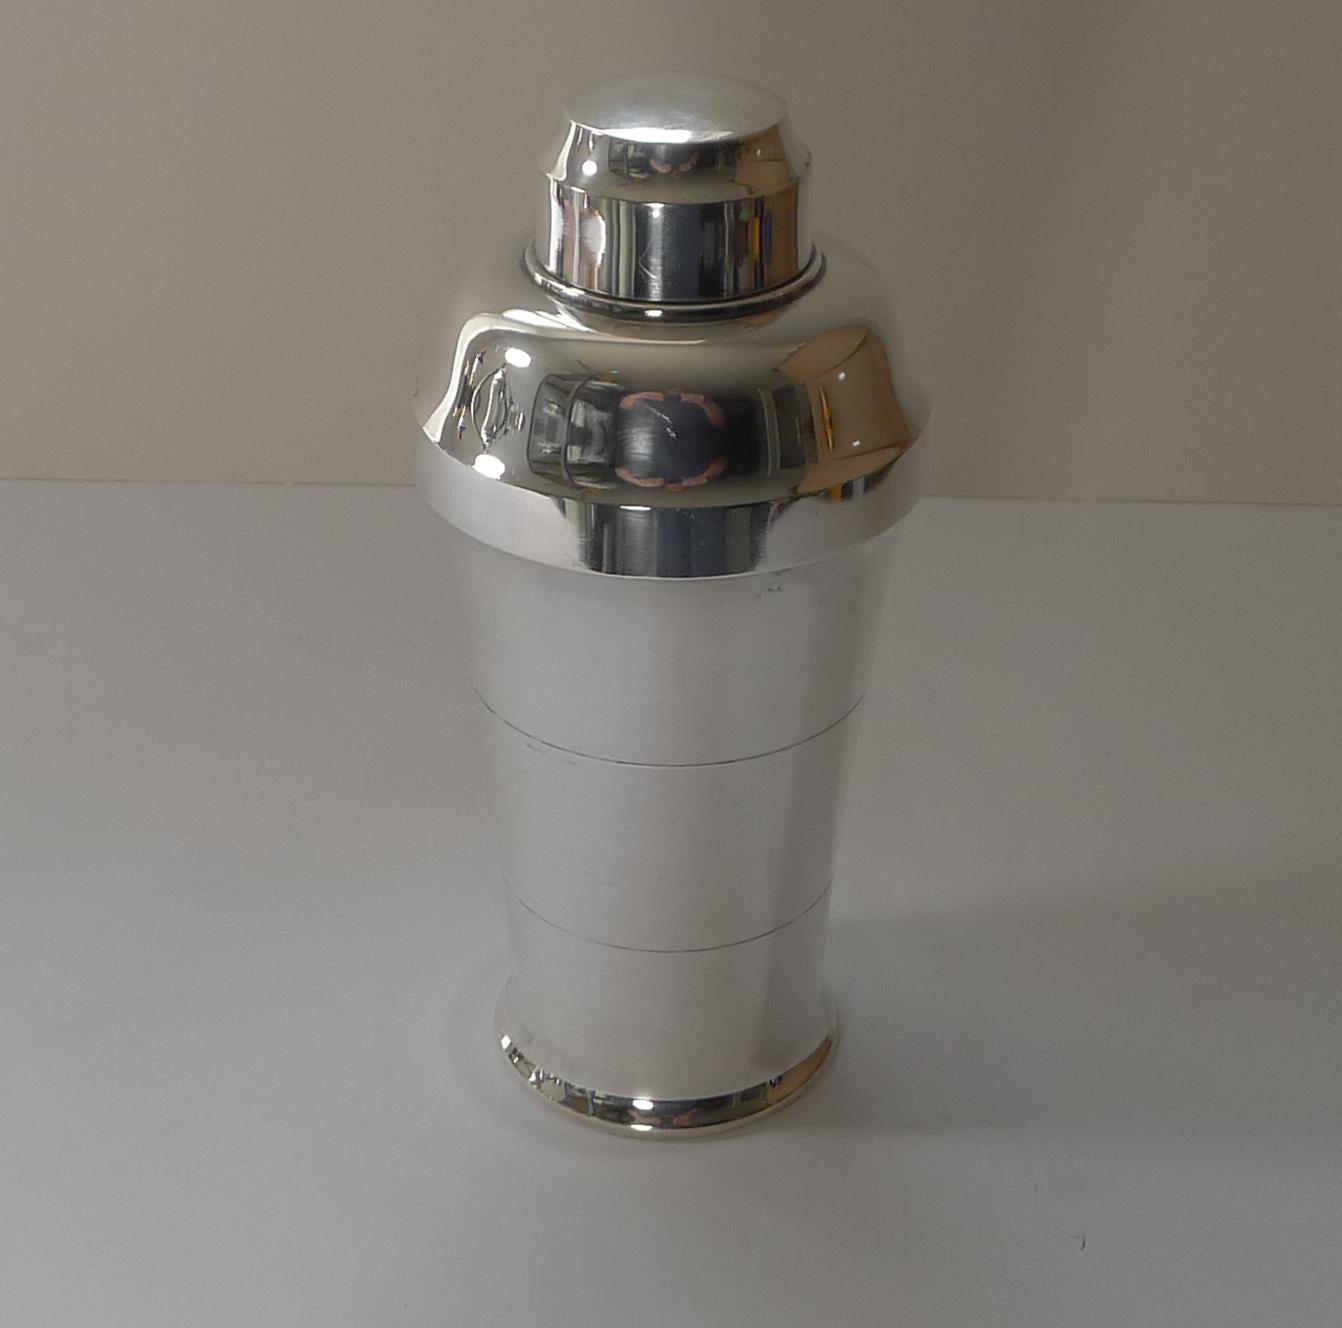 A fabulous and truly stylish Art Deco cocktail shaker with an iconic shape made from silverplate.

The underside is fully marked for the well renowned French silversmith, St Medard of Paris.

Excellent condition measuring 4